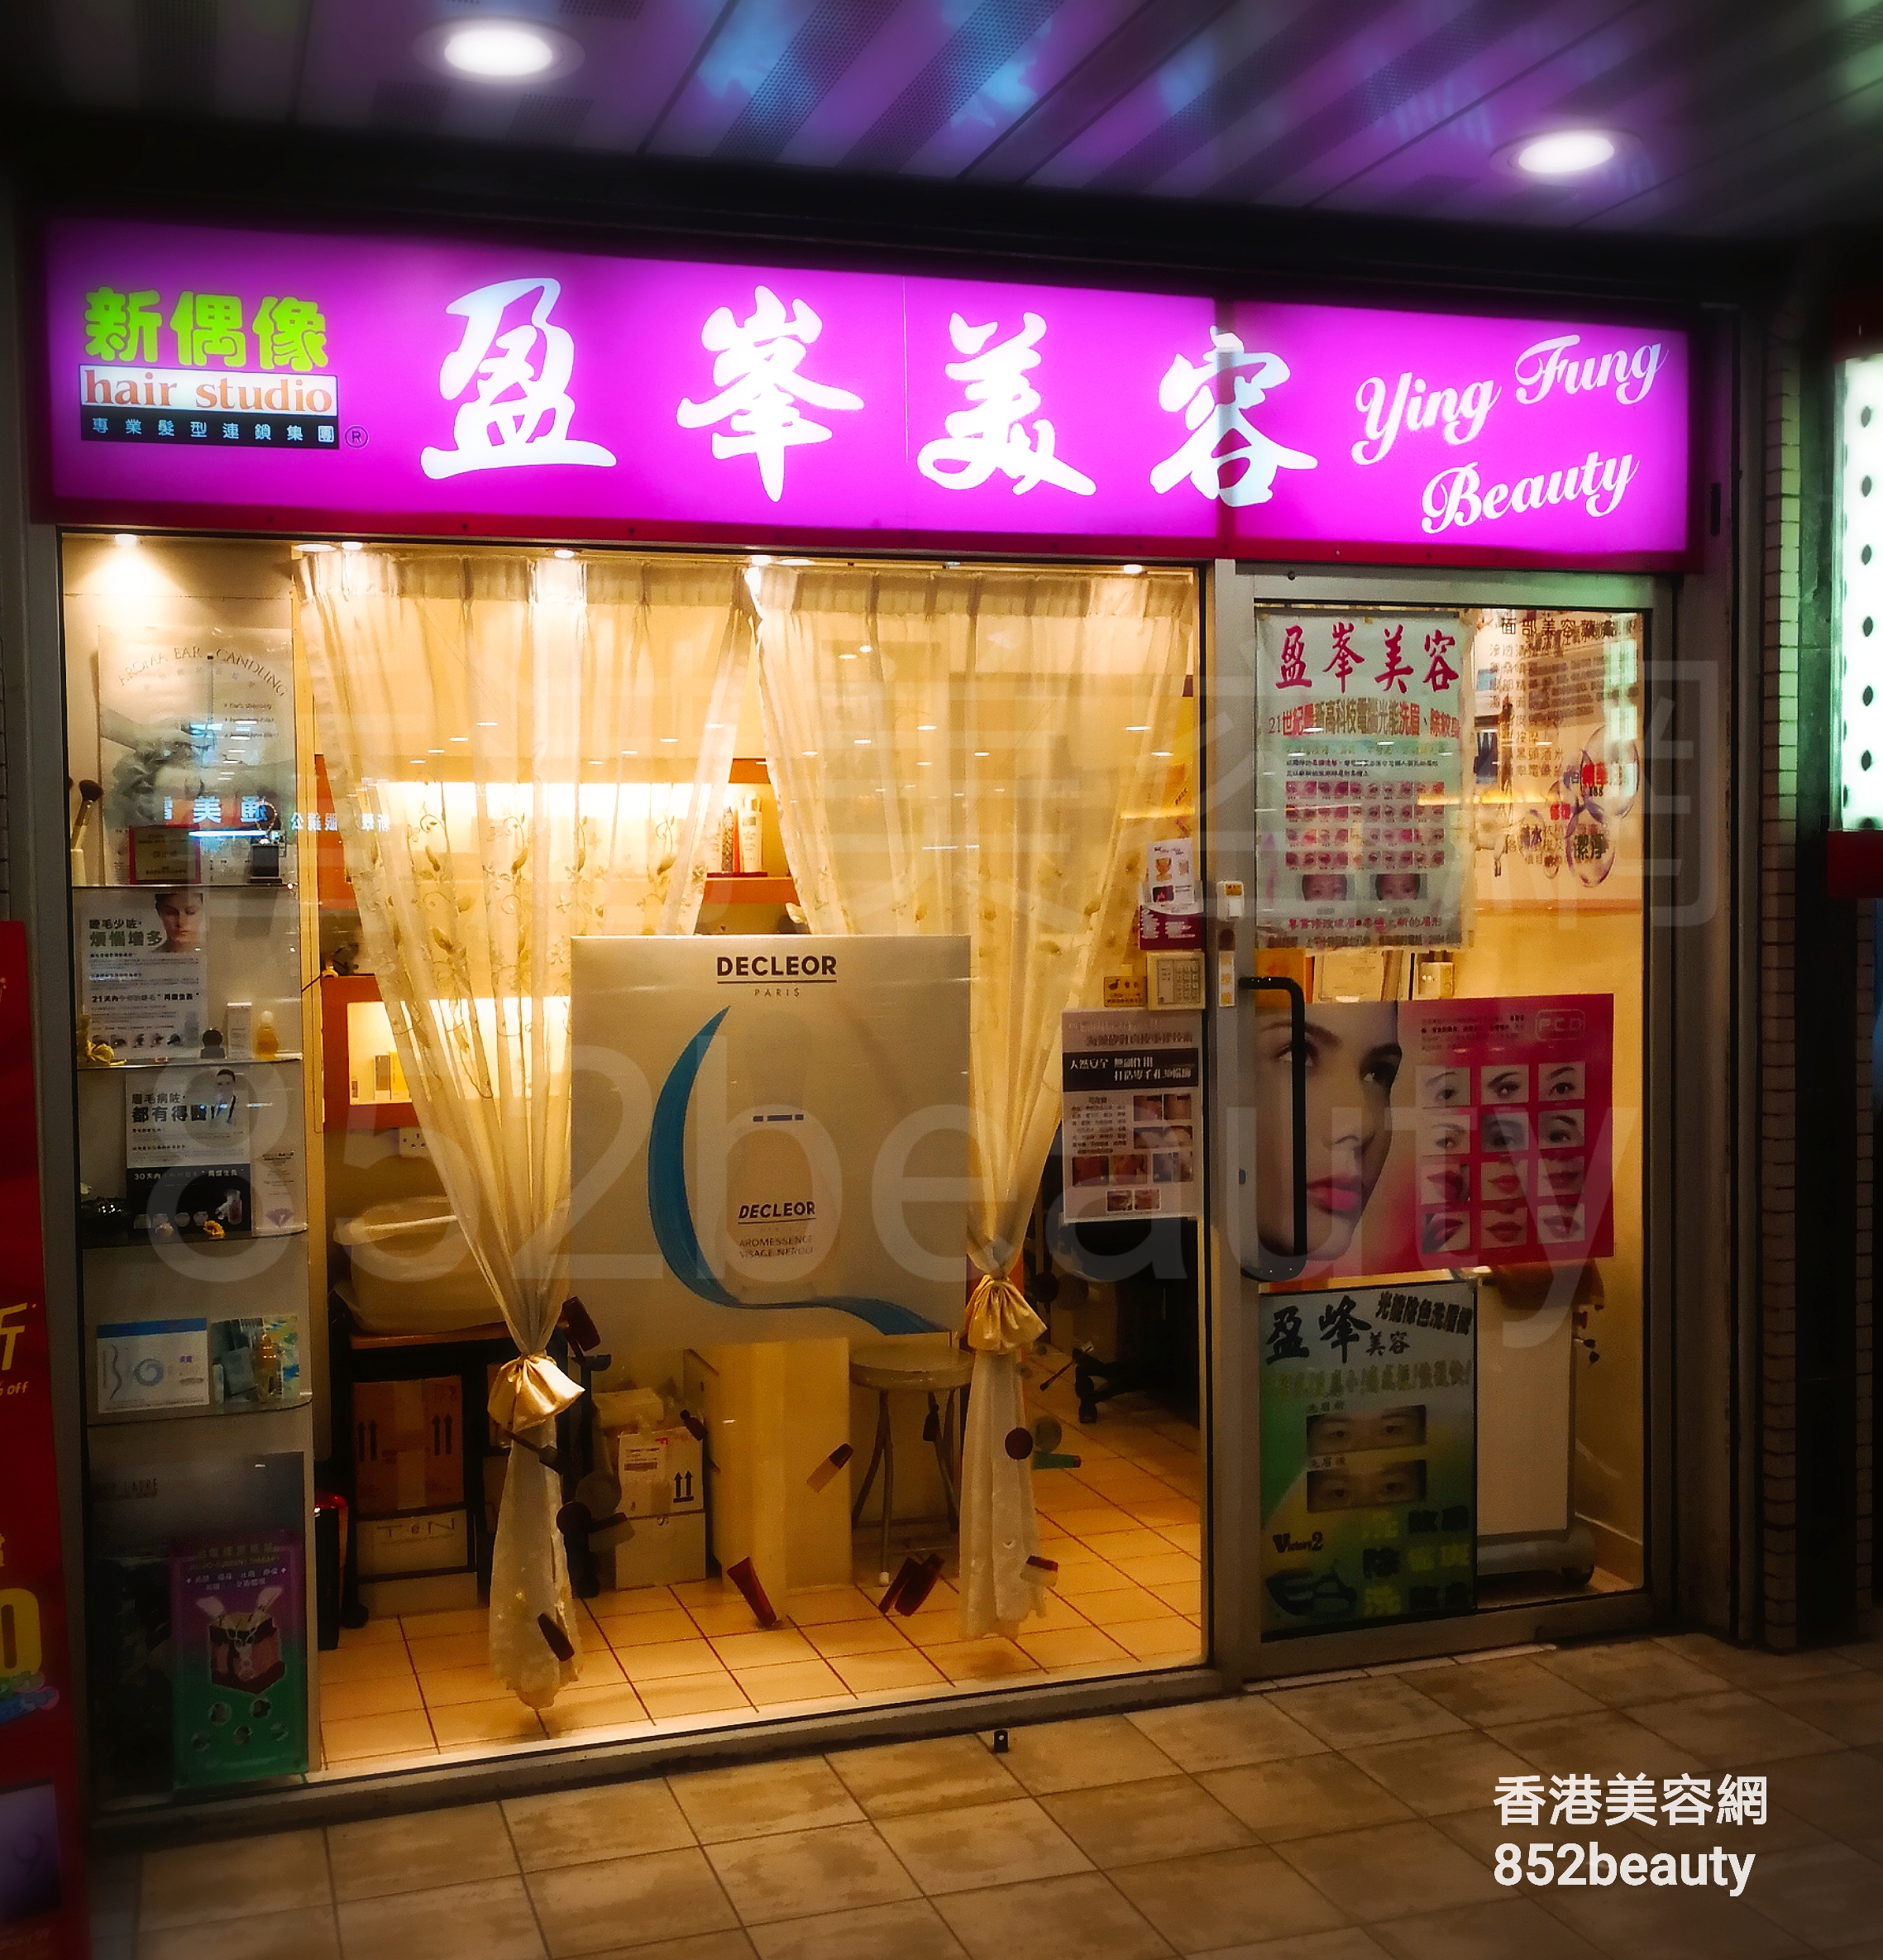 Hand and foot care: 盈峯美容